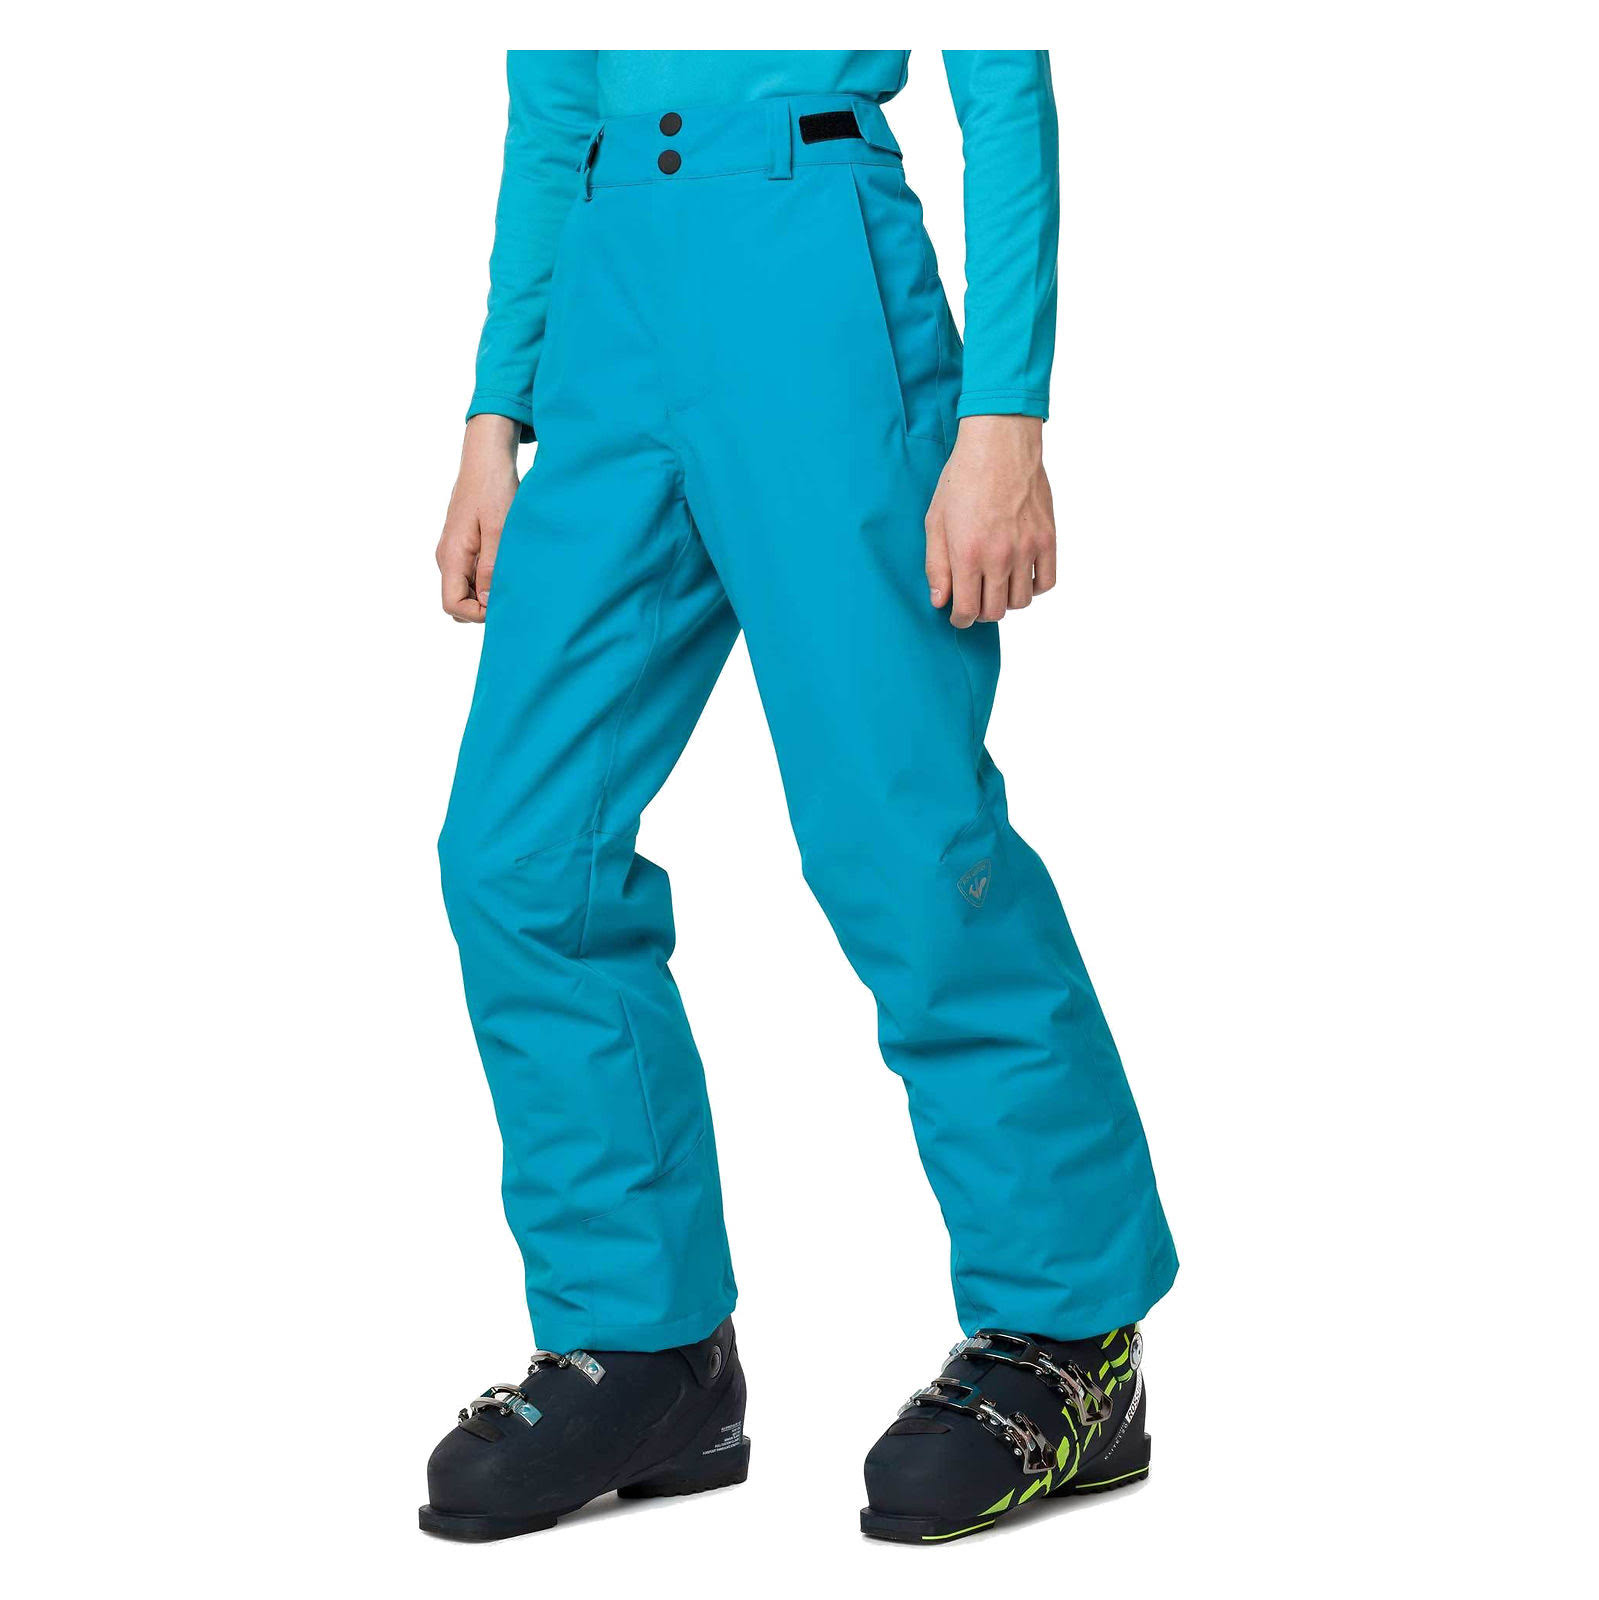 Rossignol Ski Trousers Turquoise Blue Girls - 14